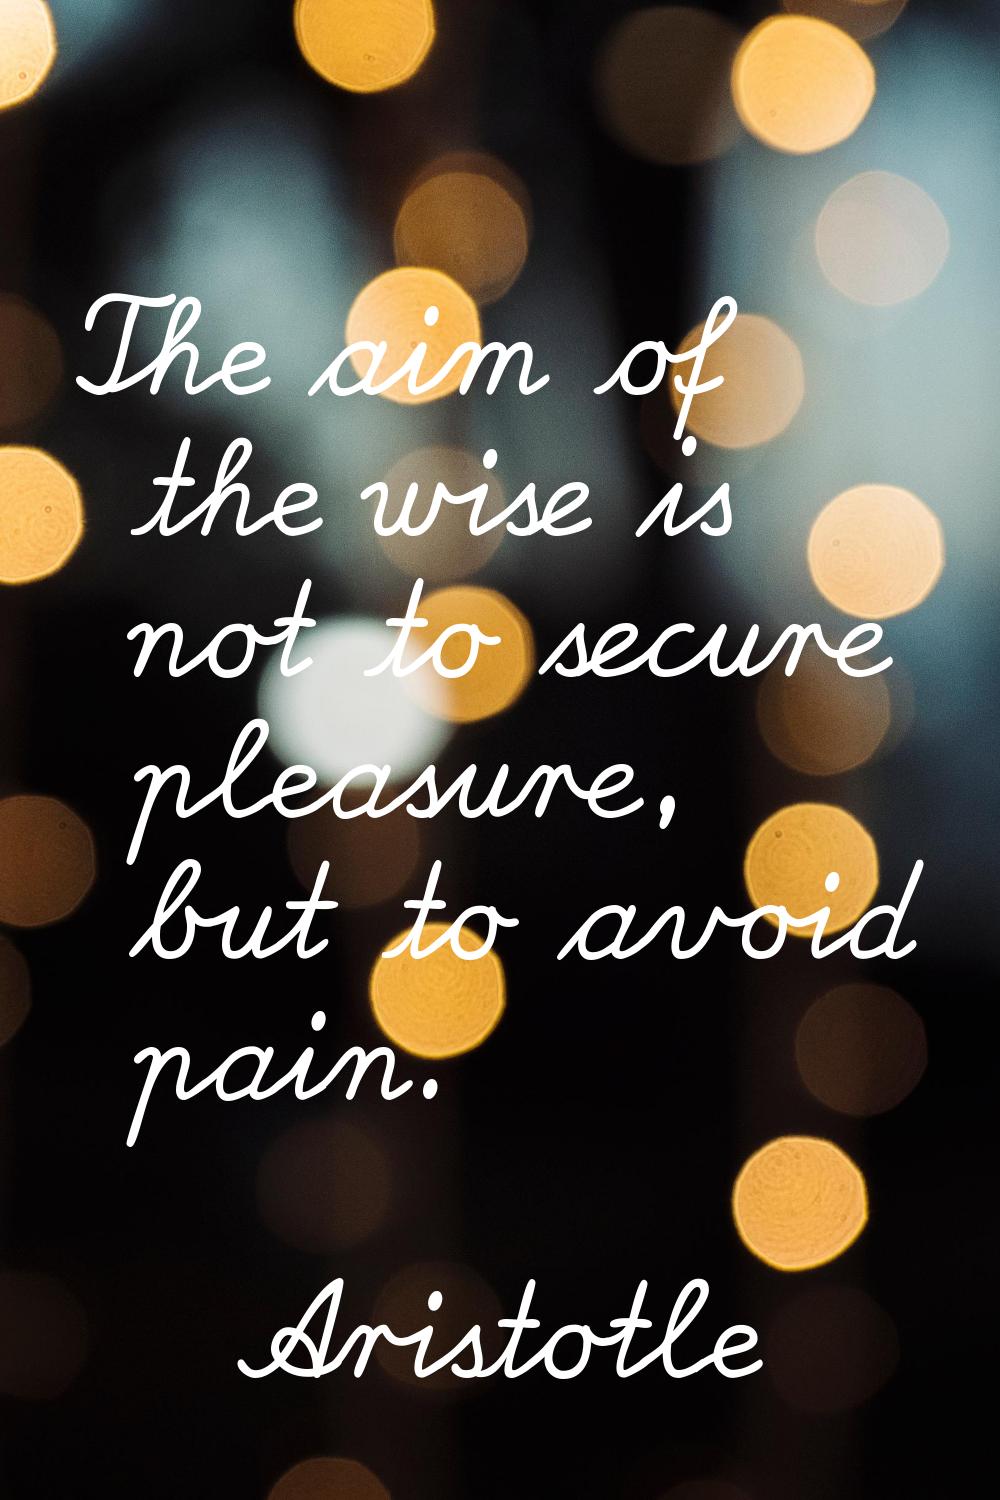 The aim of the wise is not to secure pleasure, but to avoid pain.